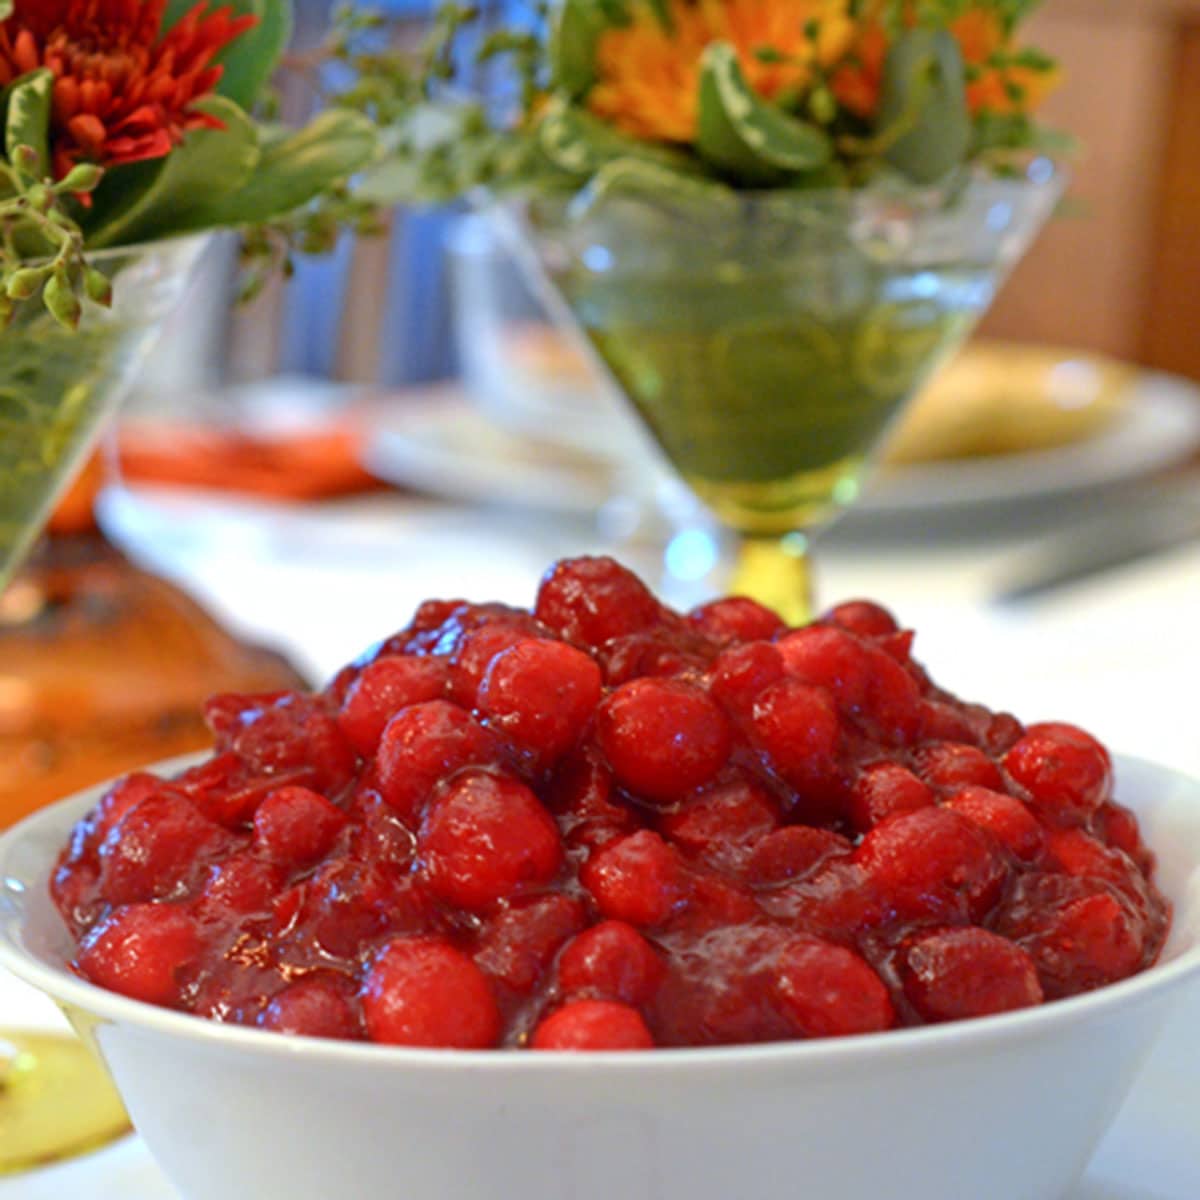 A bowl of cranberries with flower arrangement in background